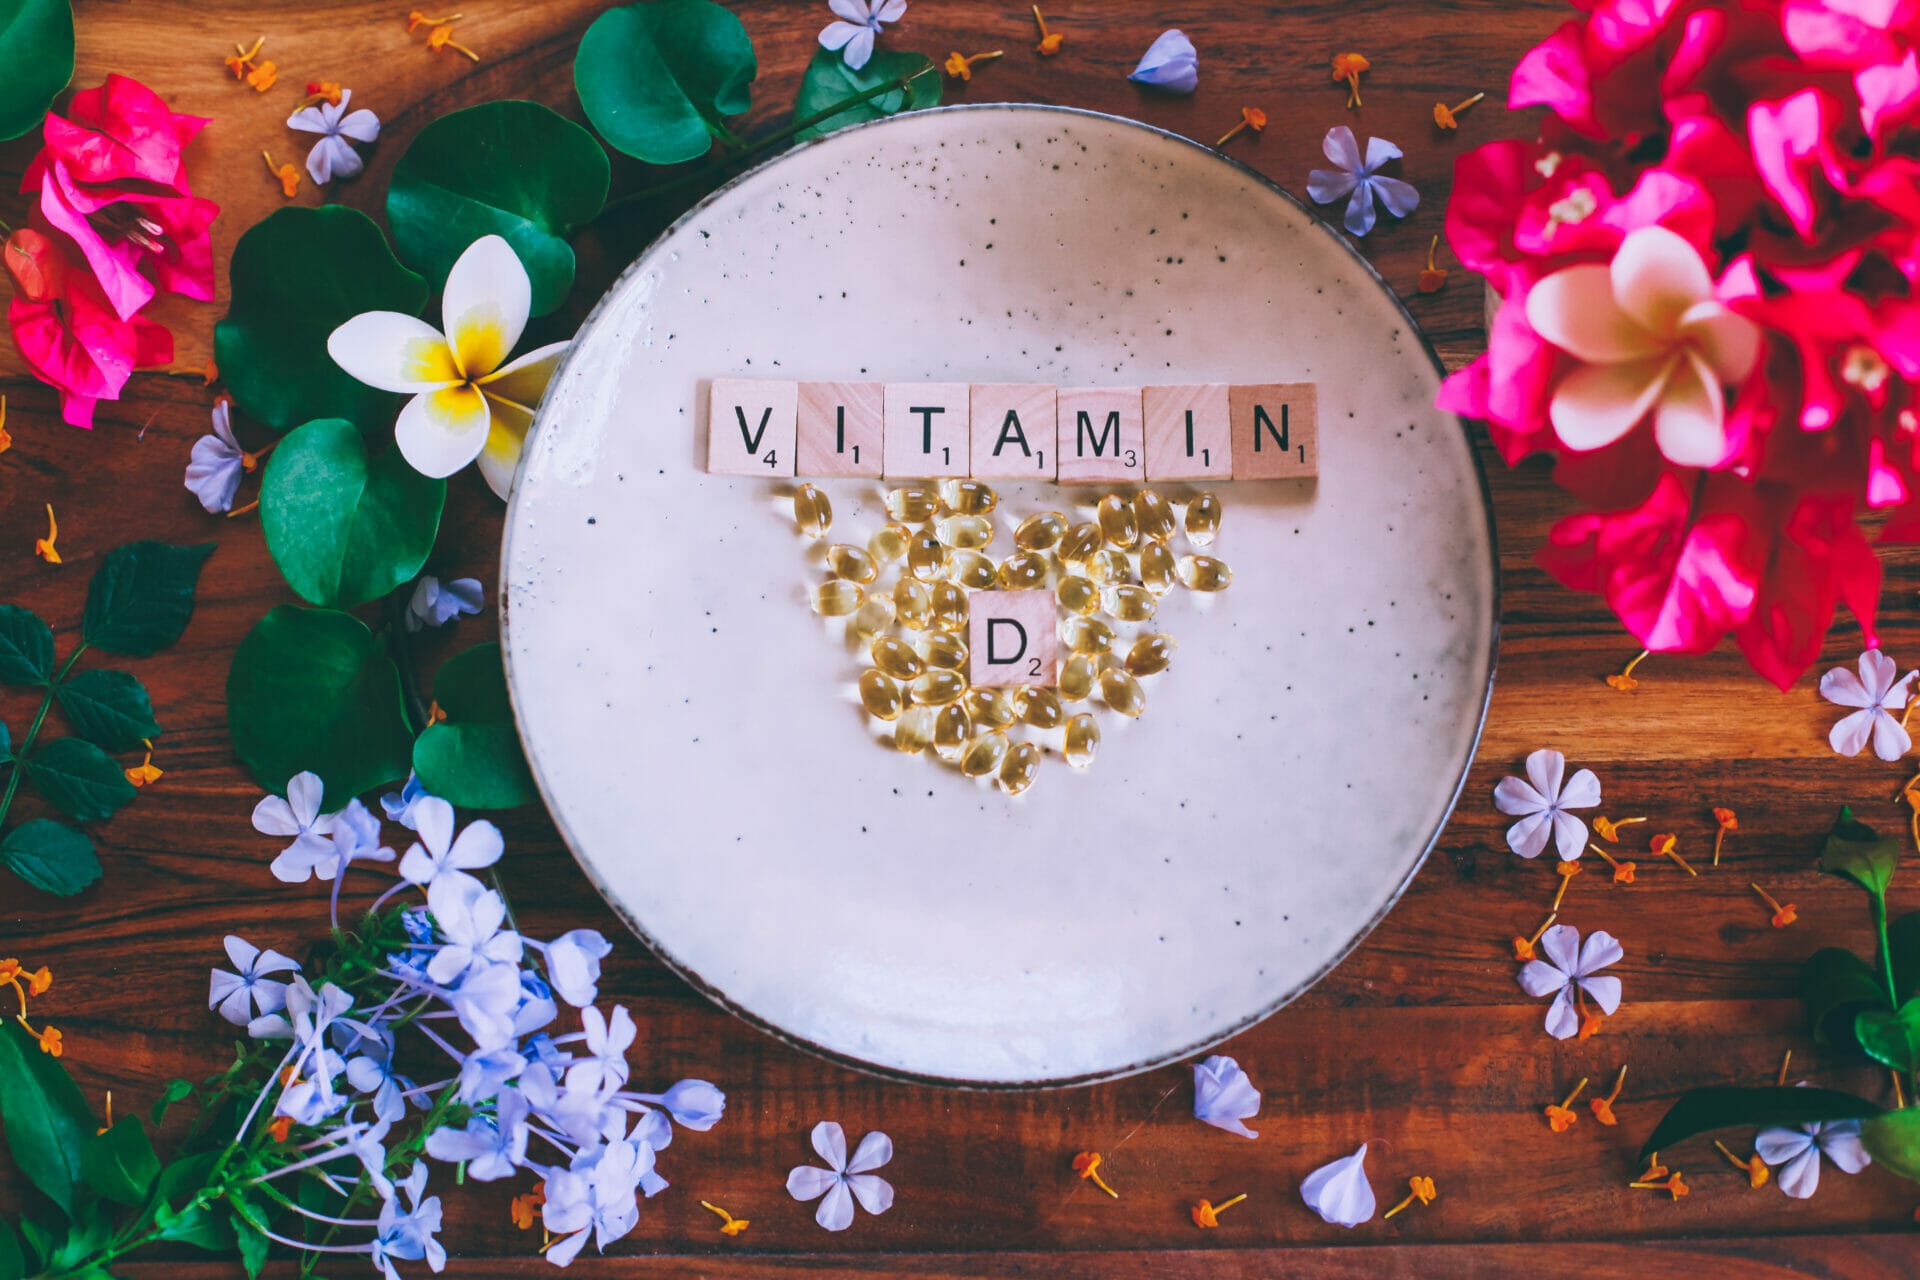 Vitamin D Deficiency: Symptoms, Treatments, Causes and More